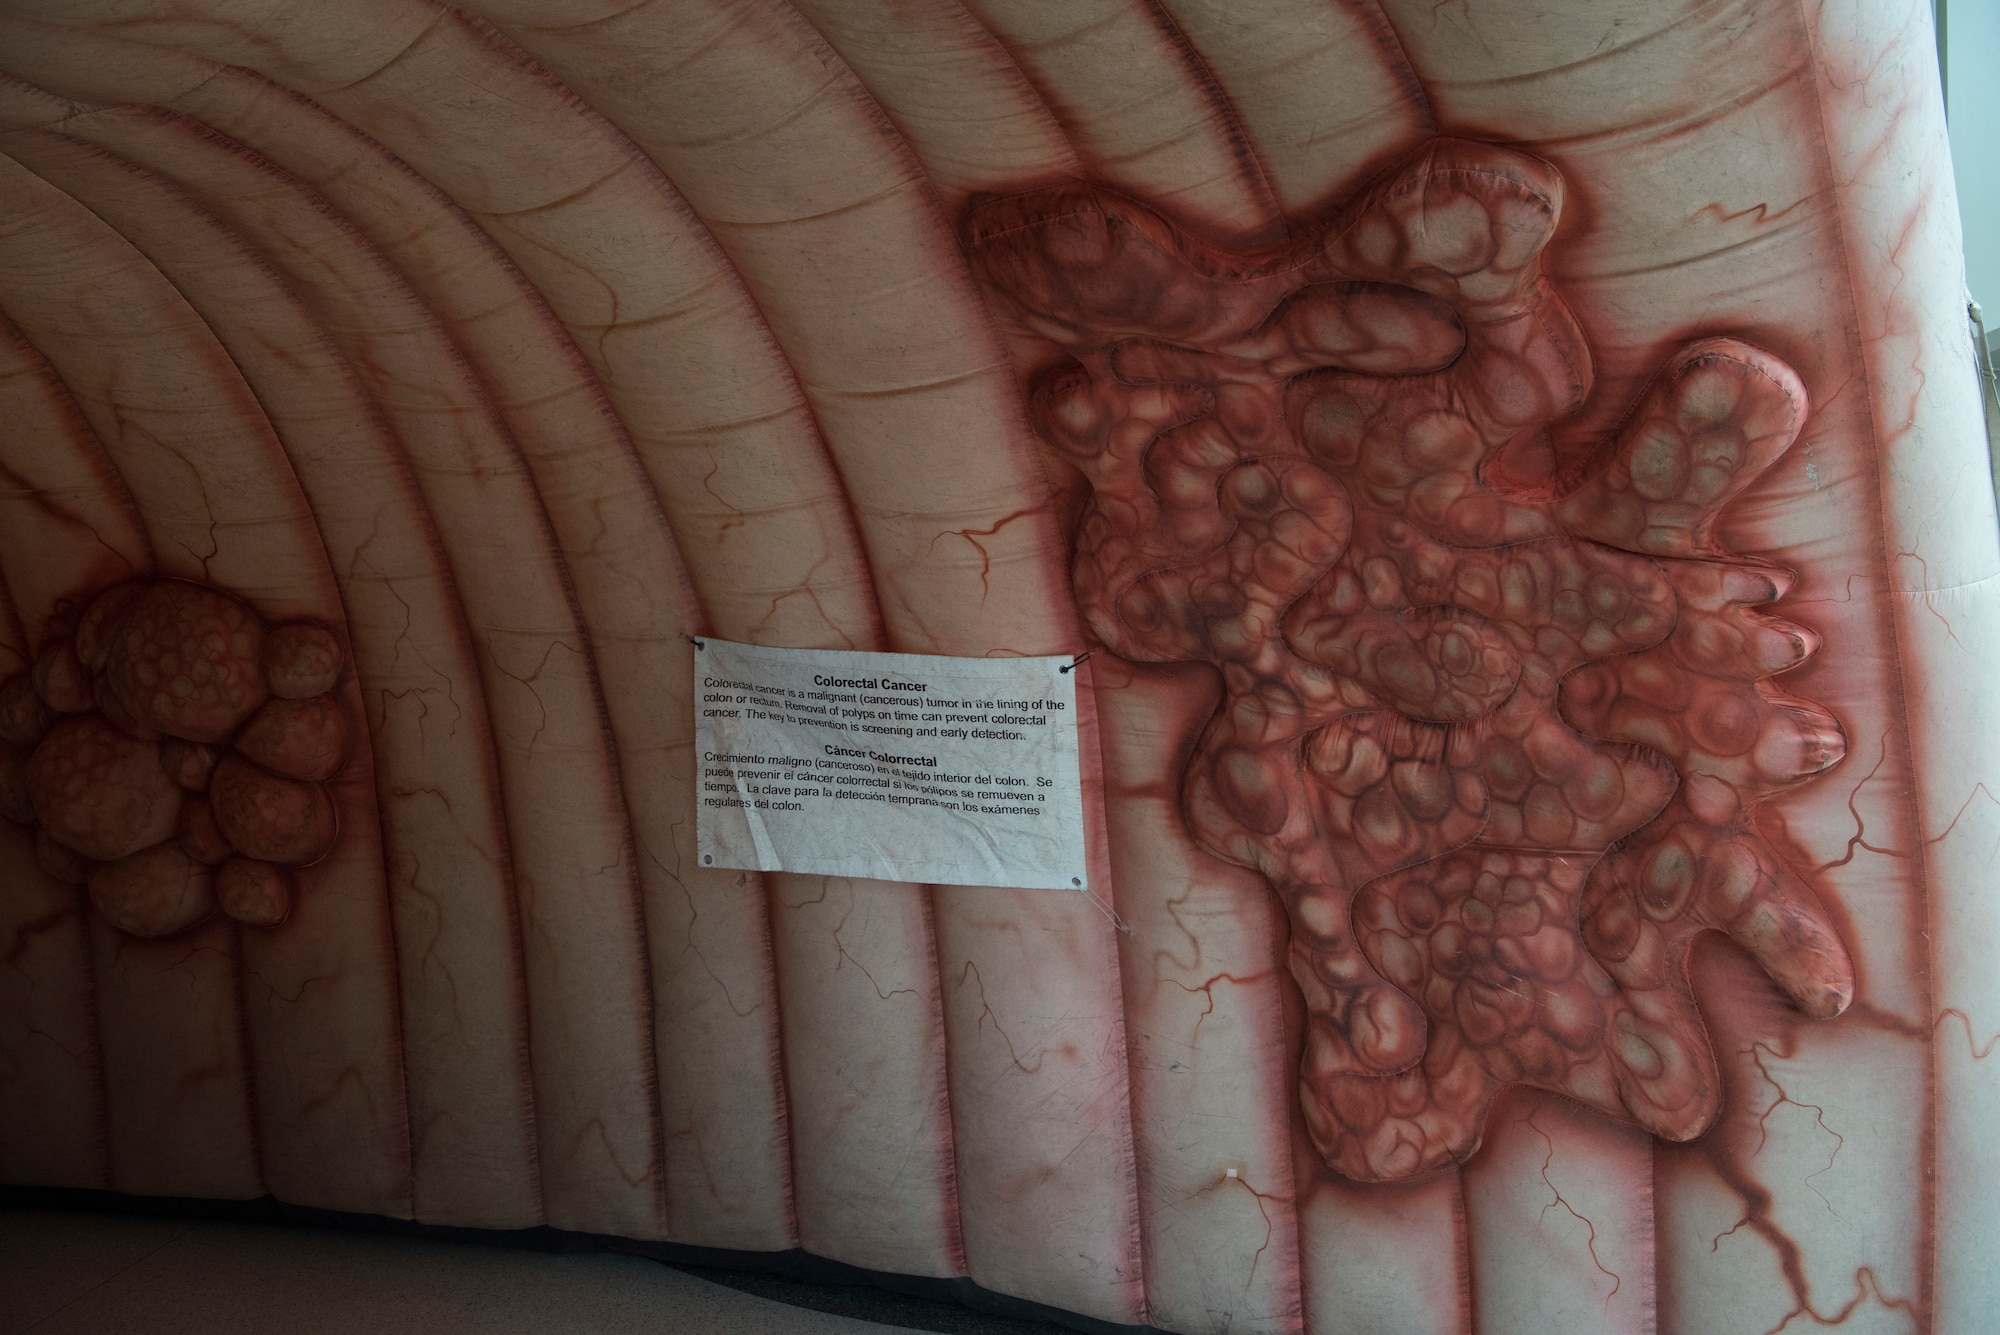 New Mexico State University’s Cancer Outreach program partners with the 49th Medical Group
to increase colorectal cancer awareness, March 7, 2019, in the medical clinic on Holloman Air
Force Base, N.M. The Cancer Outreach’s giant inflatable colon provided visual representation of
colorectal cancer. At stage four, colorectal cancer has only a 6-10 percent survival rate based on
five years. (U.S. Air Force photo by Airman 1st Class Autumn Vogt)